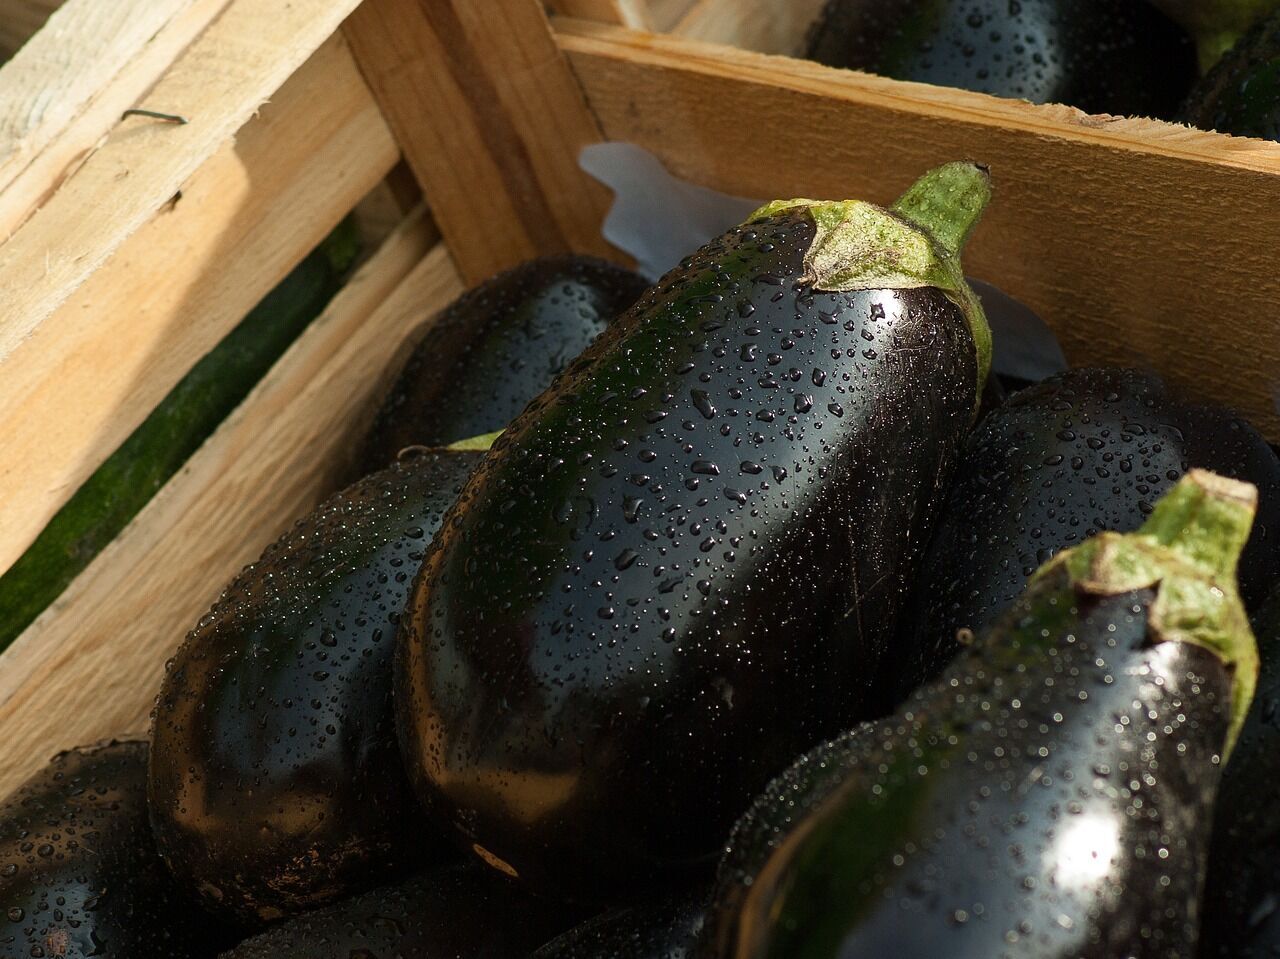 Eggplant for cooking delicious dishes